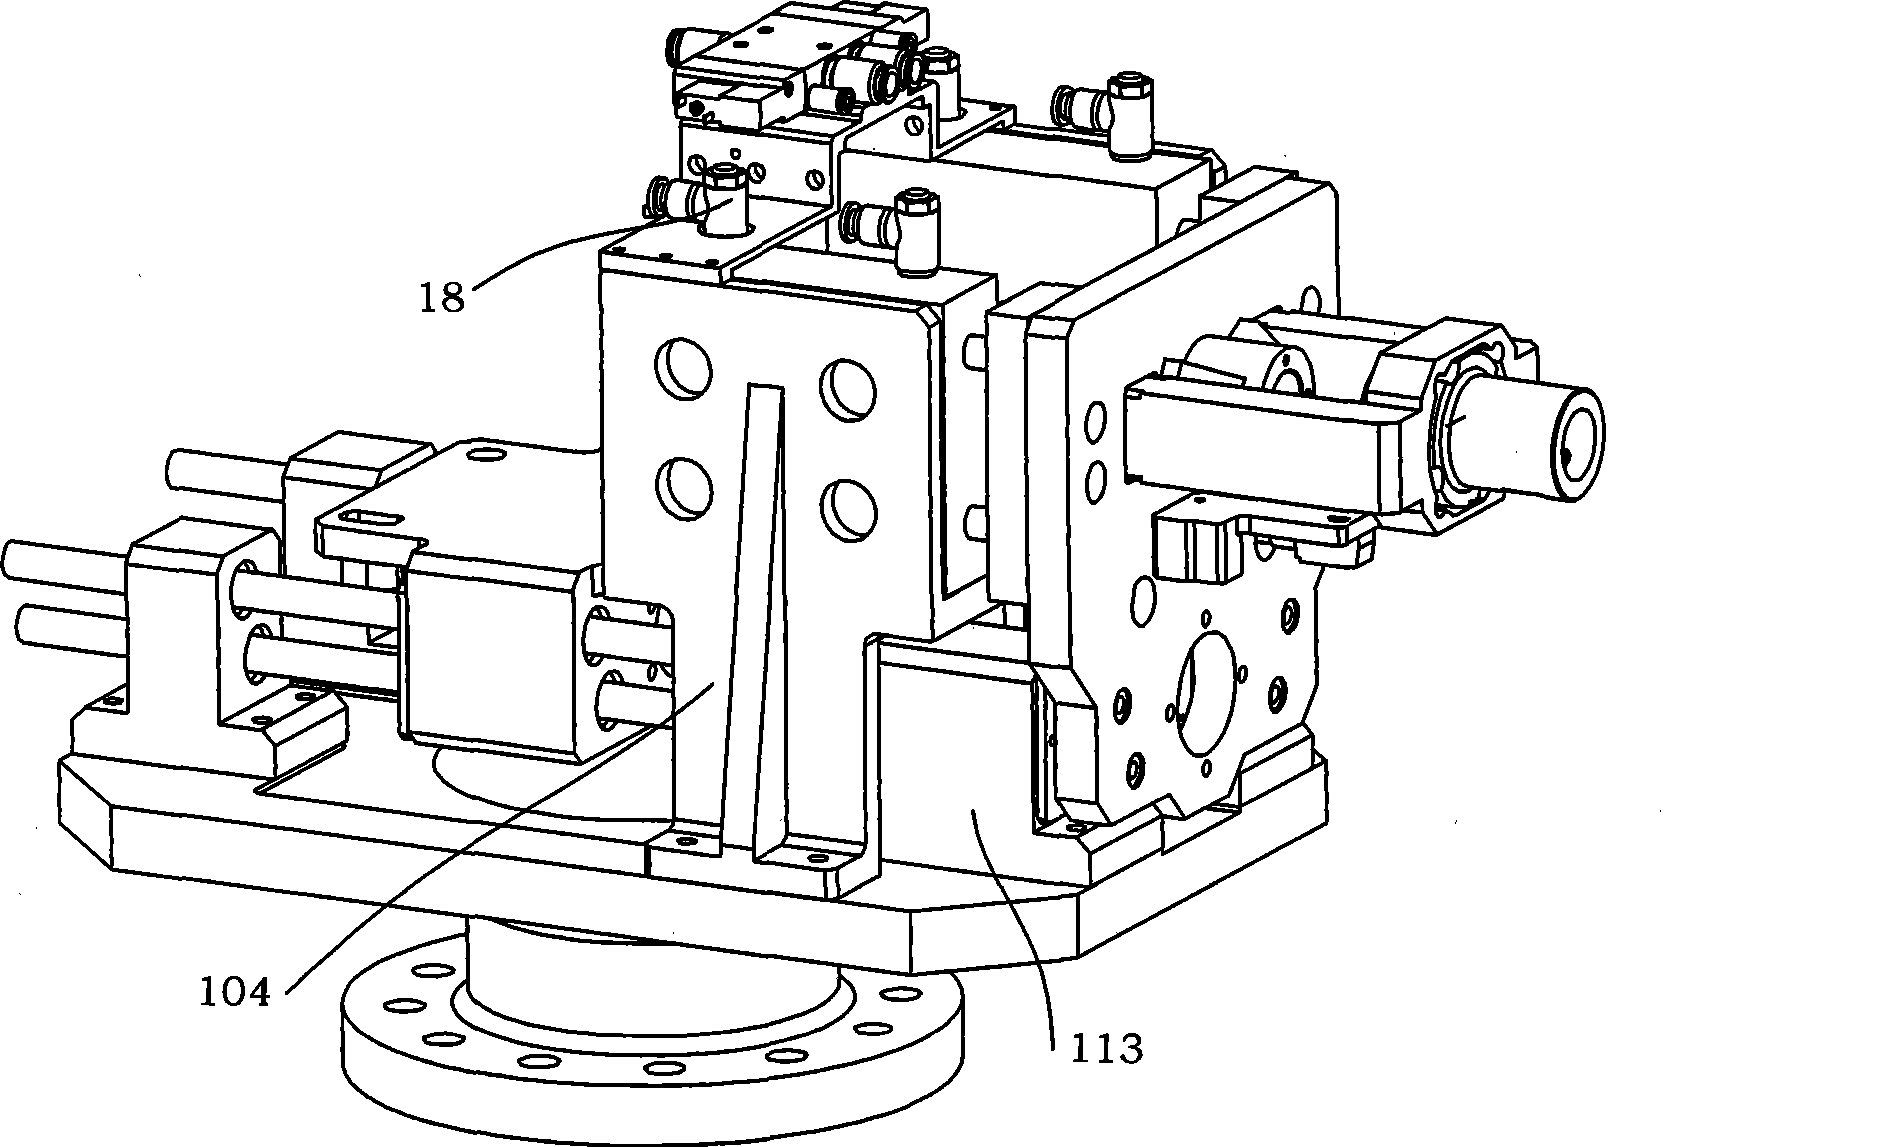 Drill end actuator